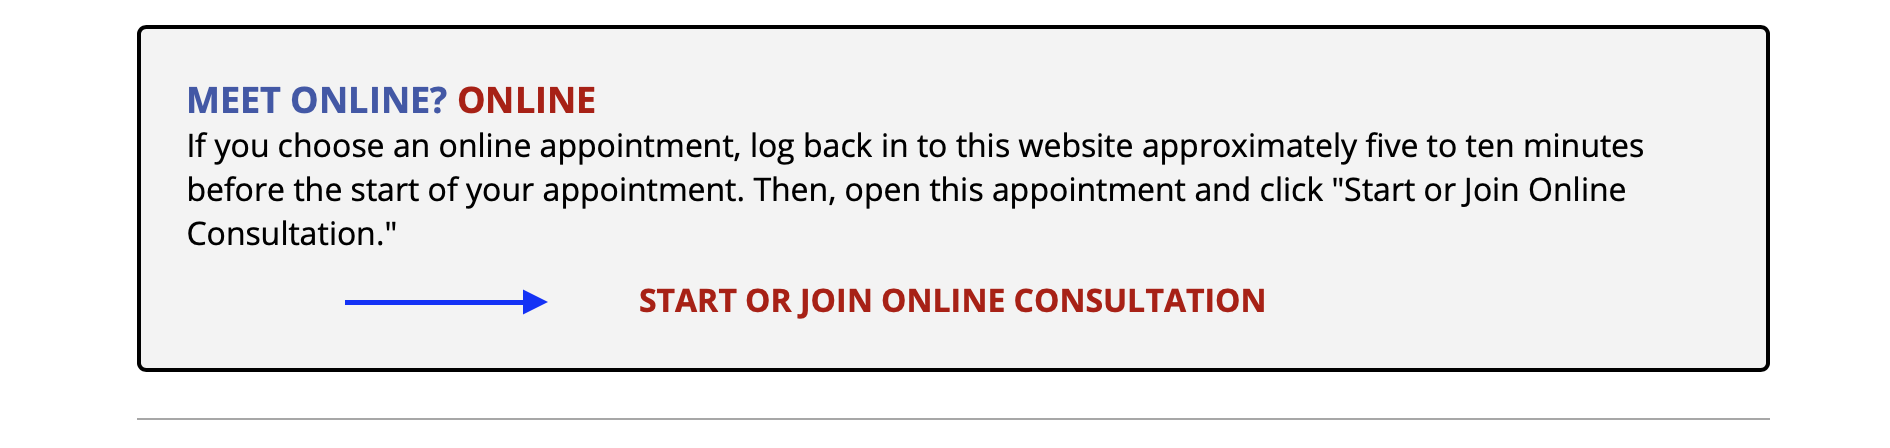 Join or start online appointment button